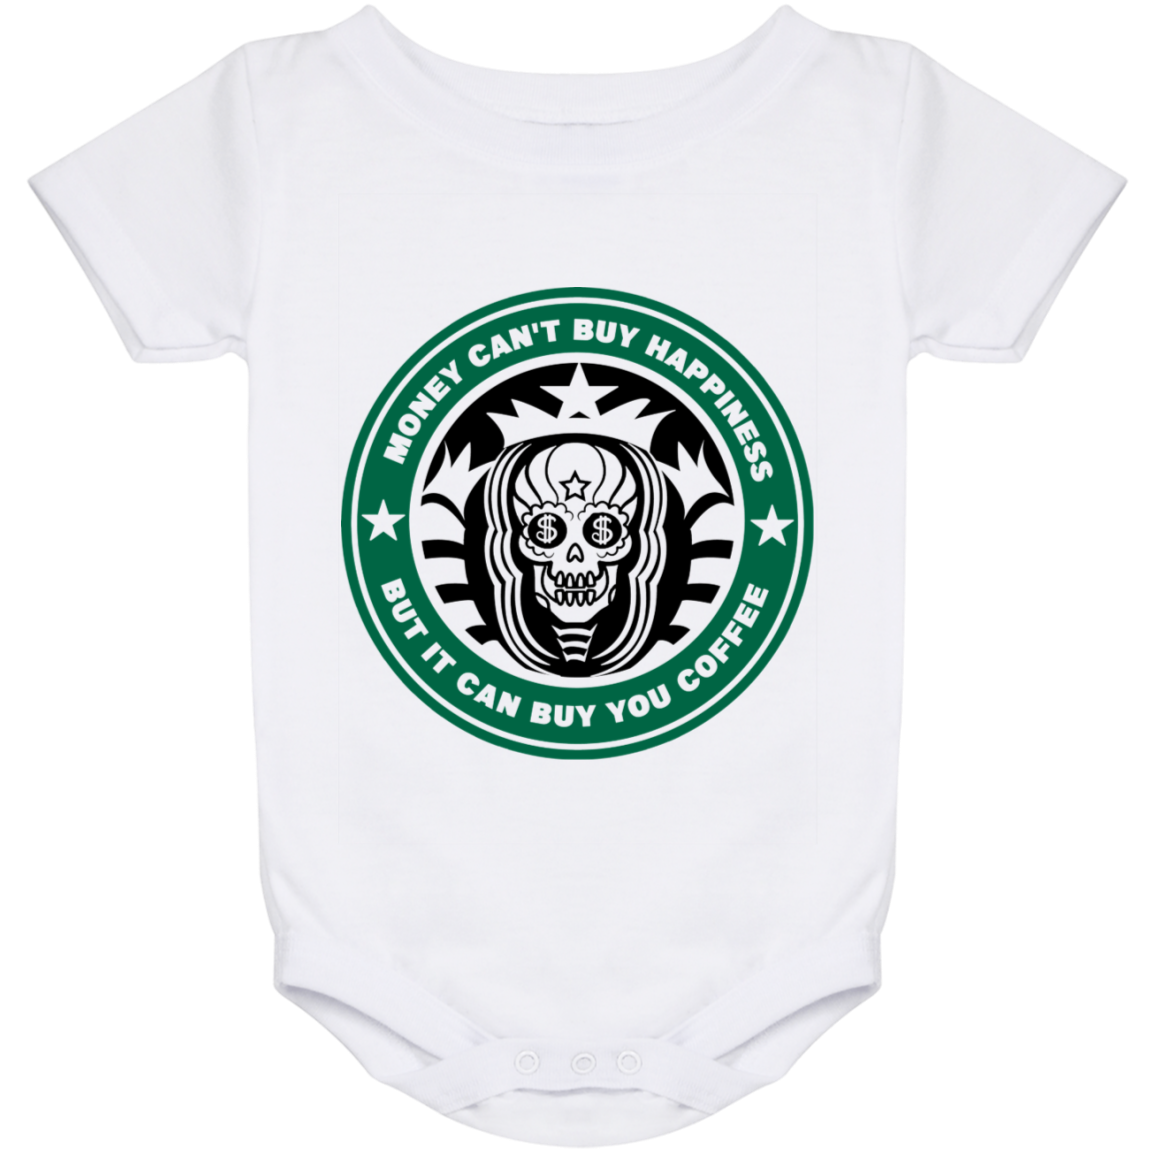 ArtichokeUSA Custom Design. Money Can't Buy Happiness But It Can Buy You Coffee. Baby Onesie 24 Month